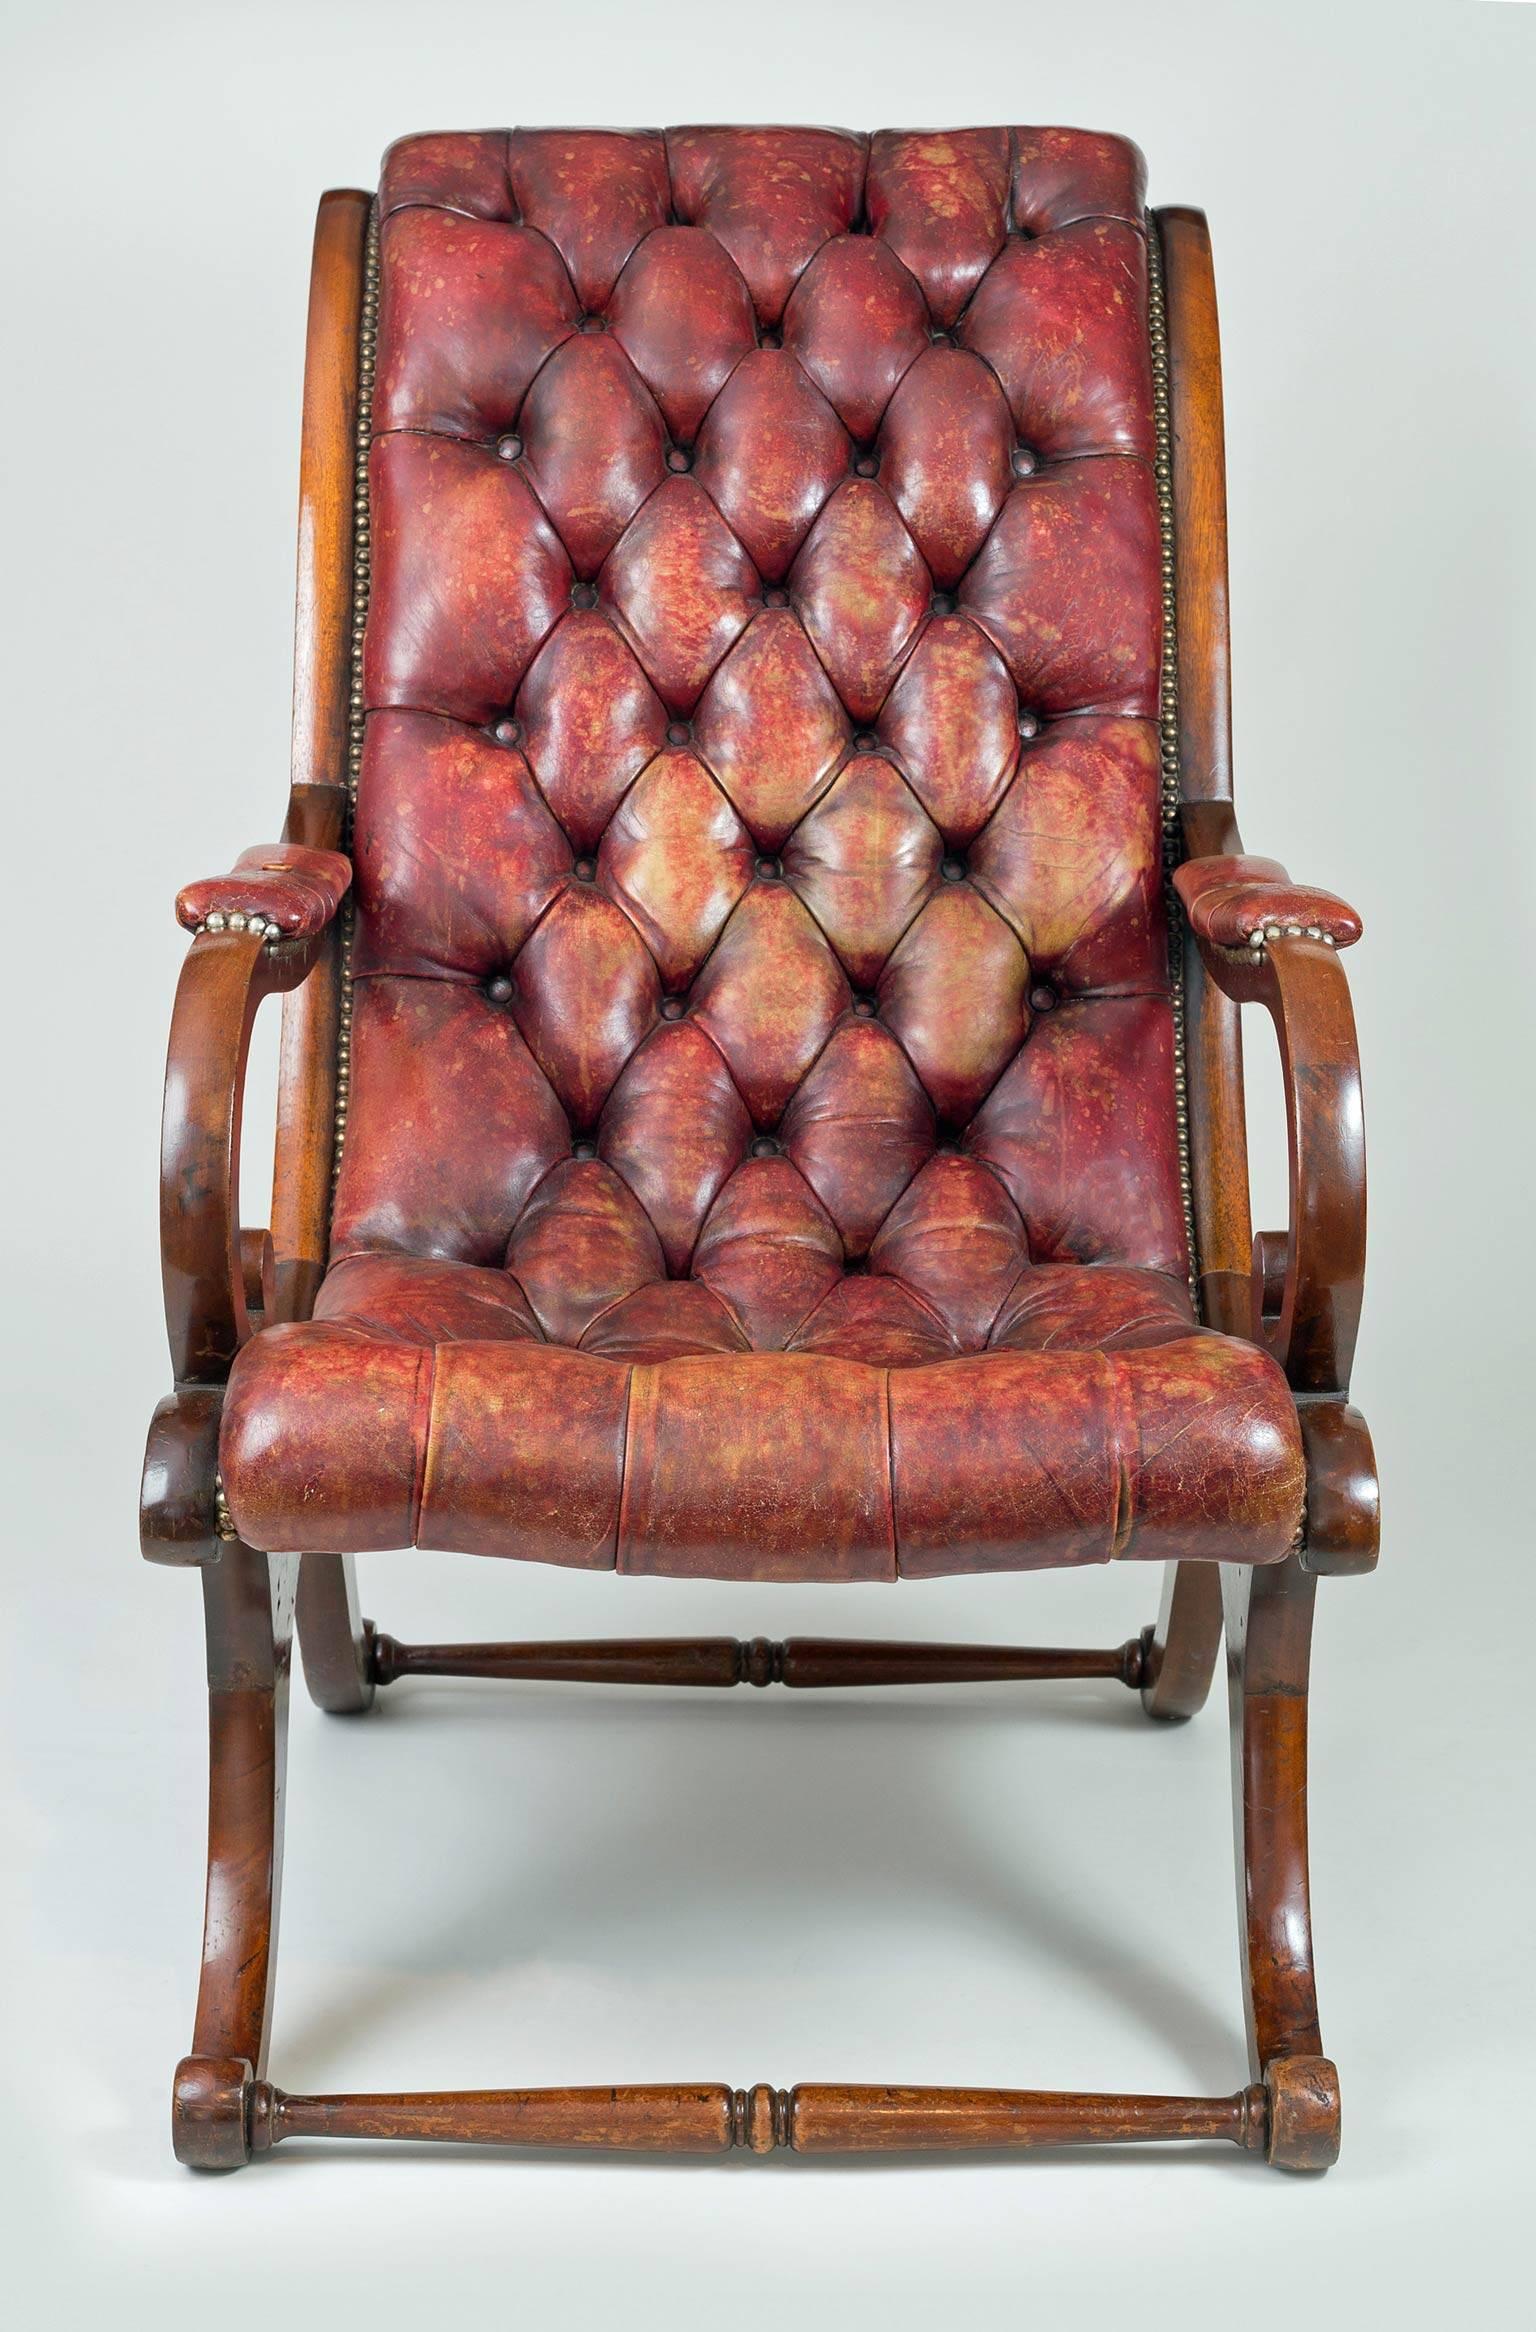 William IV mahogany and leather “sleigh” shaped library armchair with scrolled back, scroll arm supports, C-shaped legs joined by turned stretchers front and back. Upholstered in deep buttoned faded red leather and brass nailheads all around.